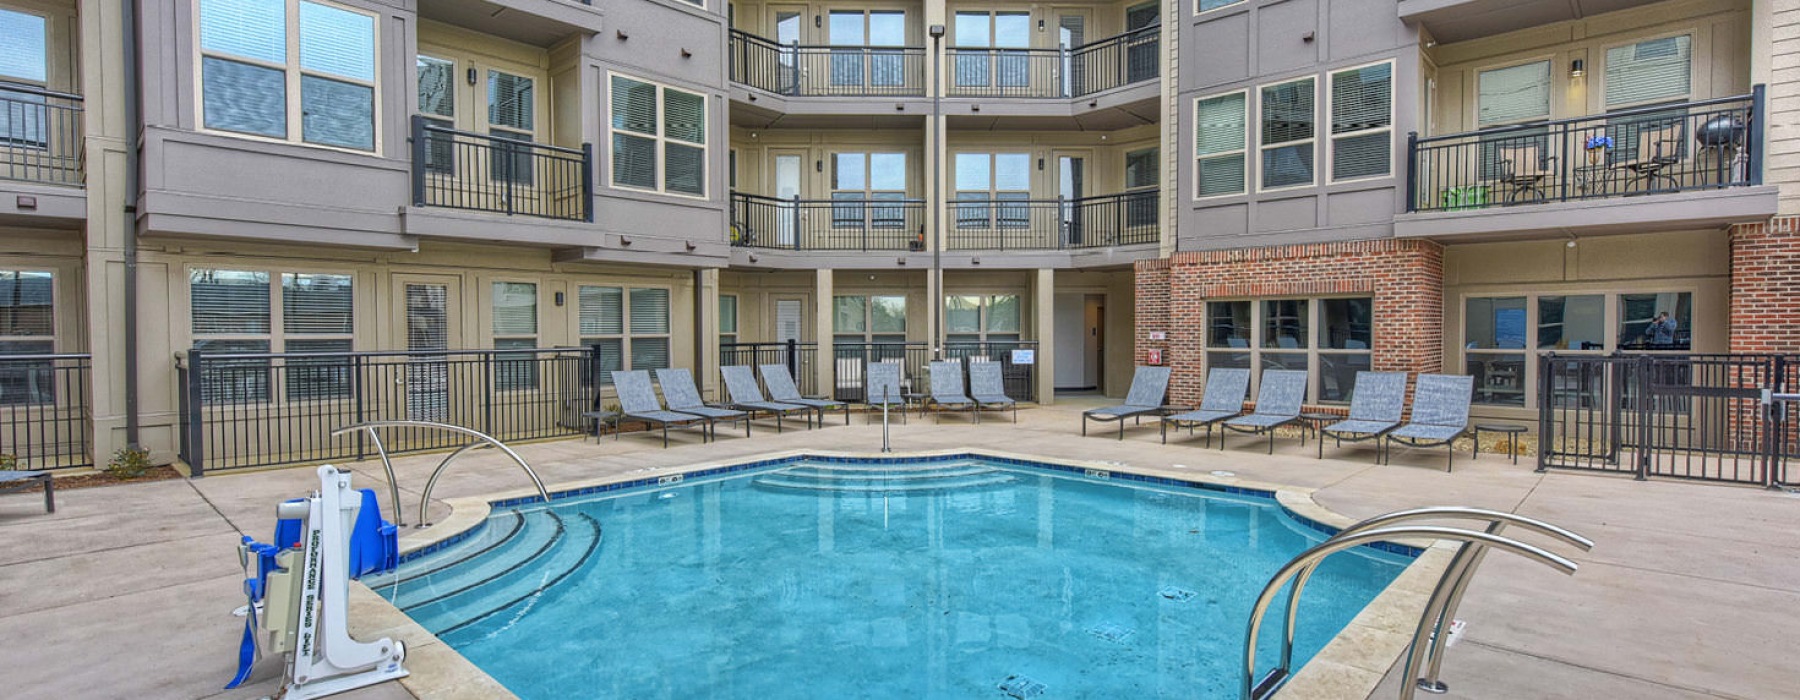 Relaxing Saltwater Lounge Pool in The Linden Apartments